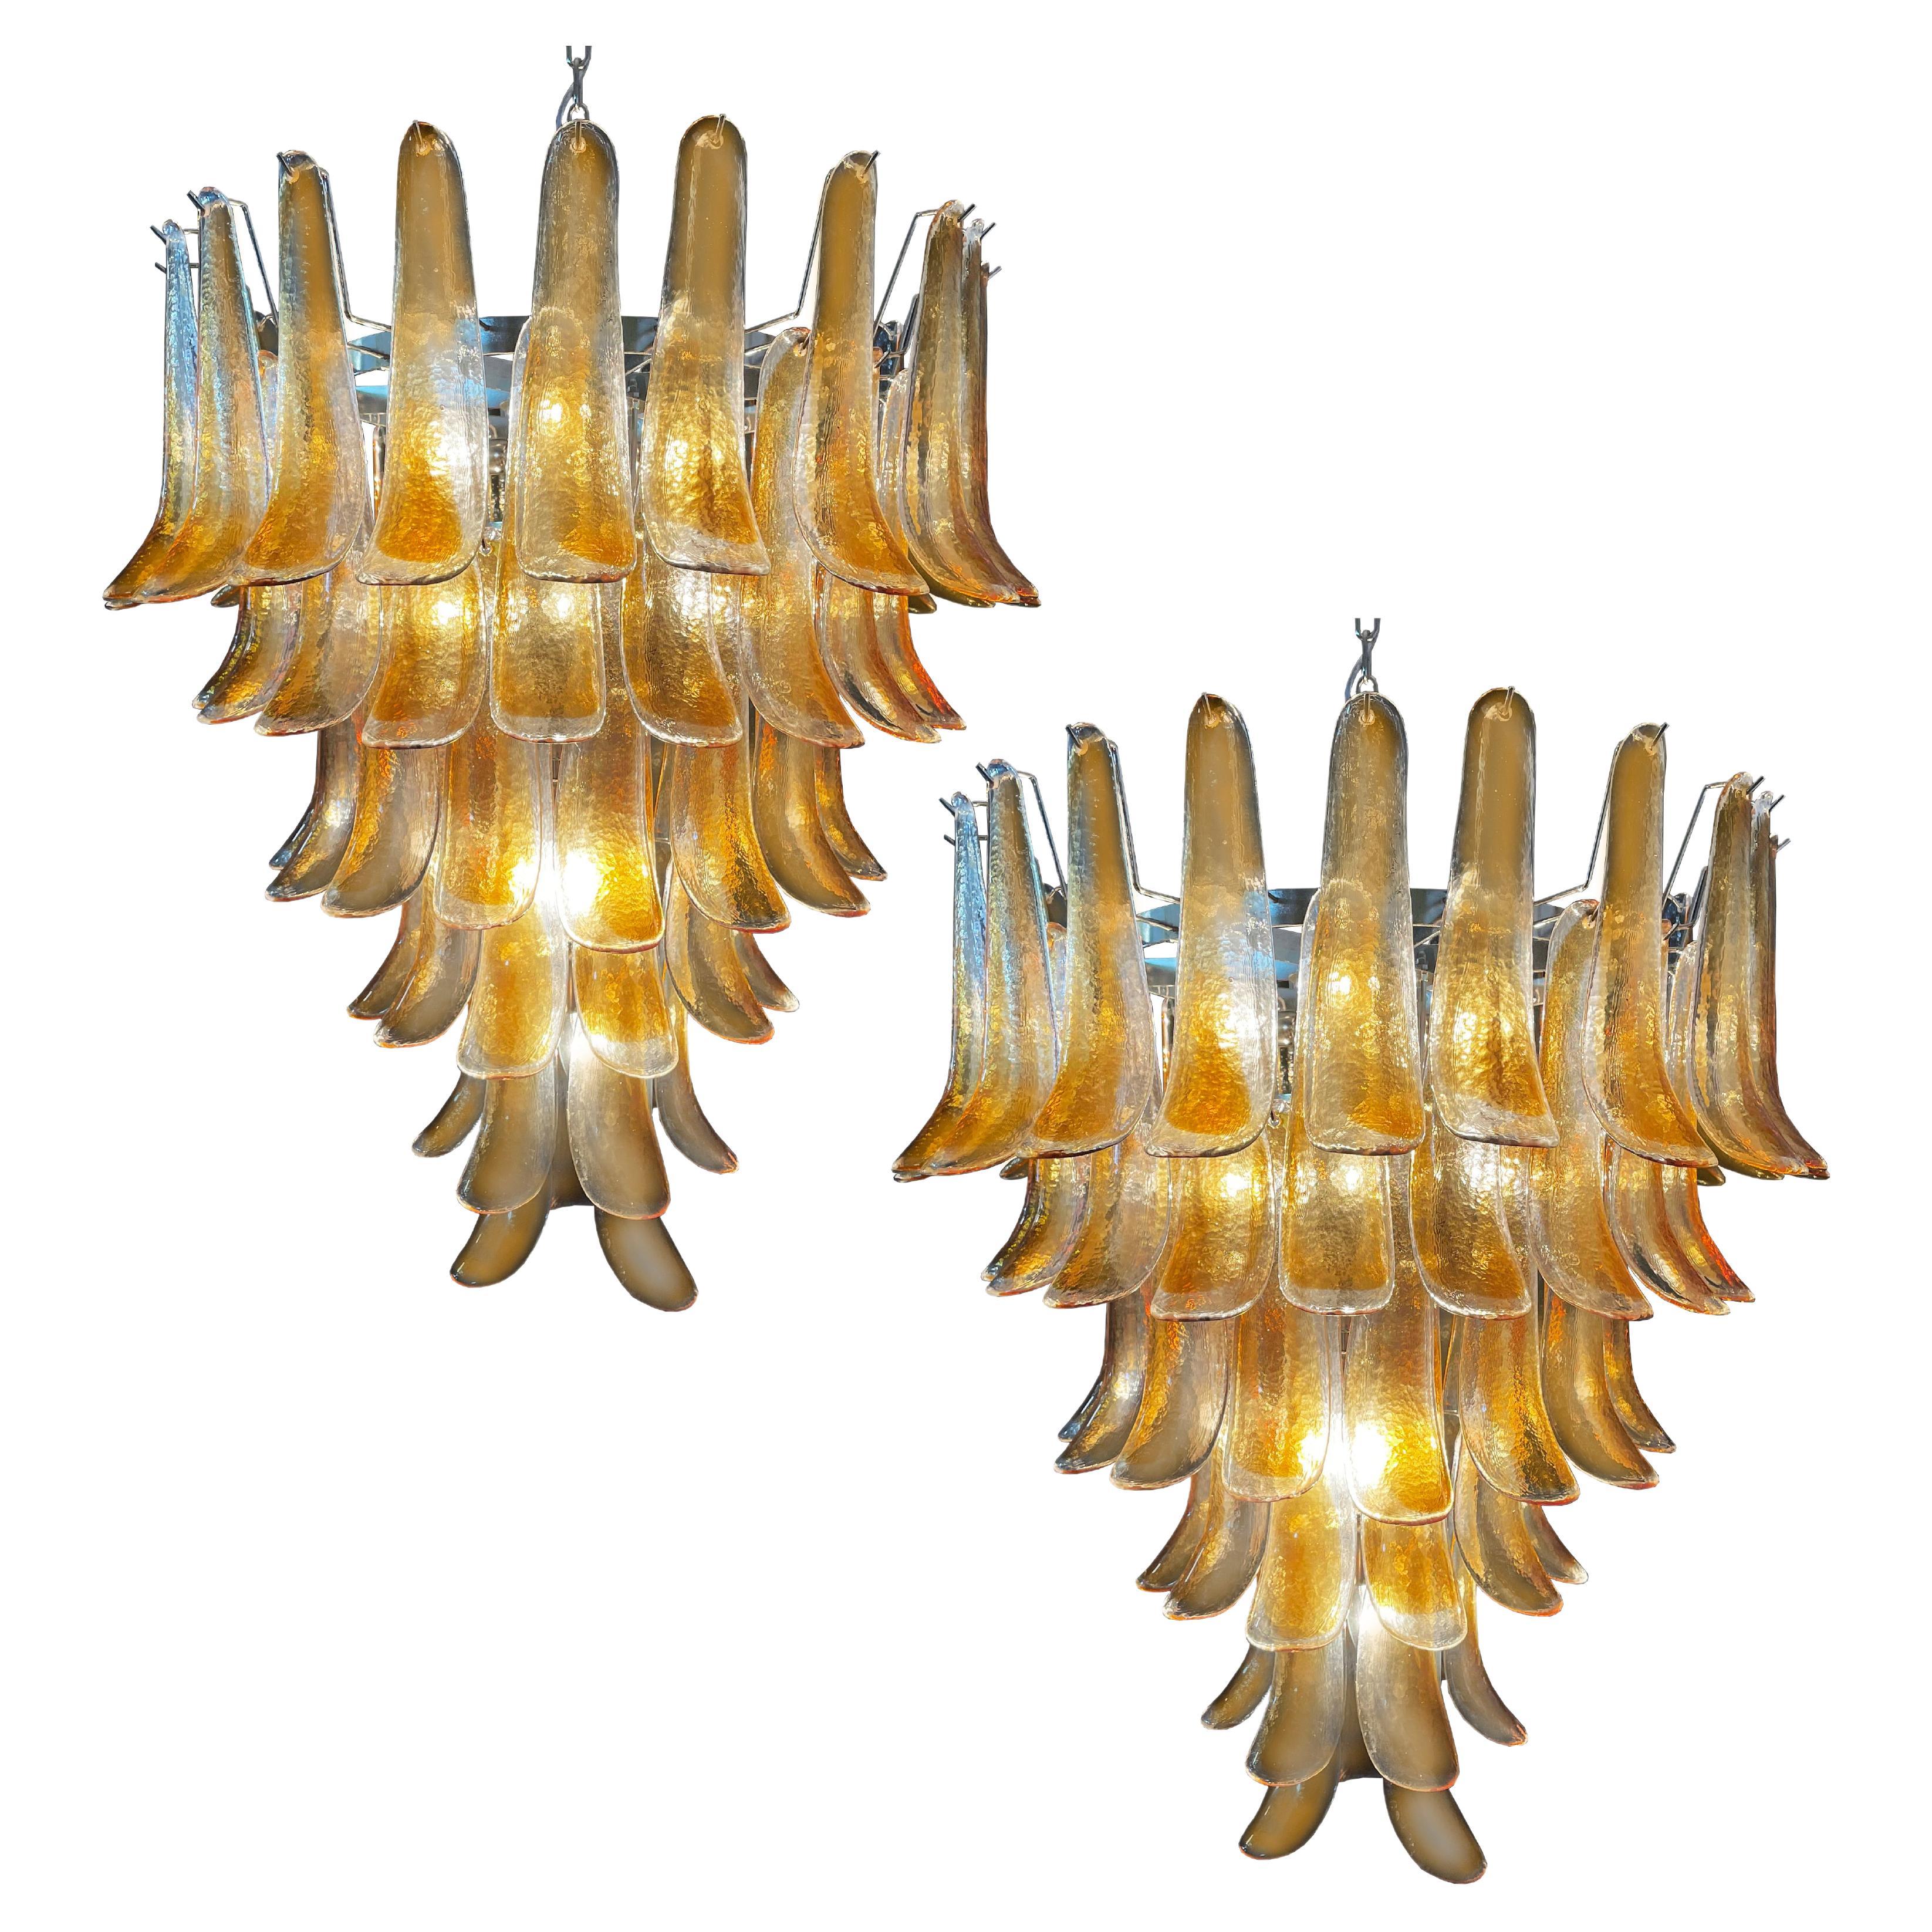 Stupendous Pair of Murano Mid-Century Chandeliers For Sale